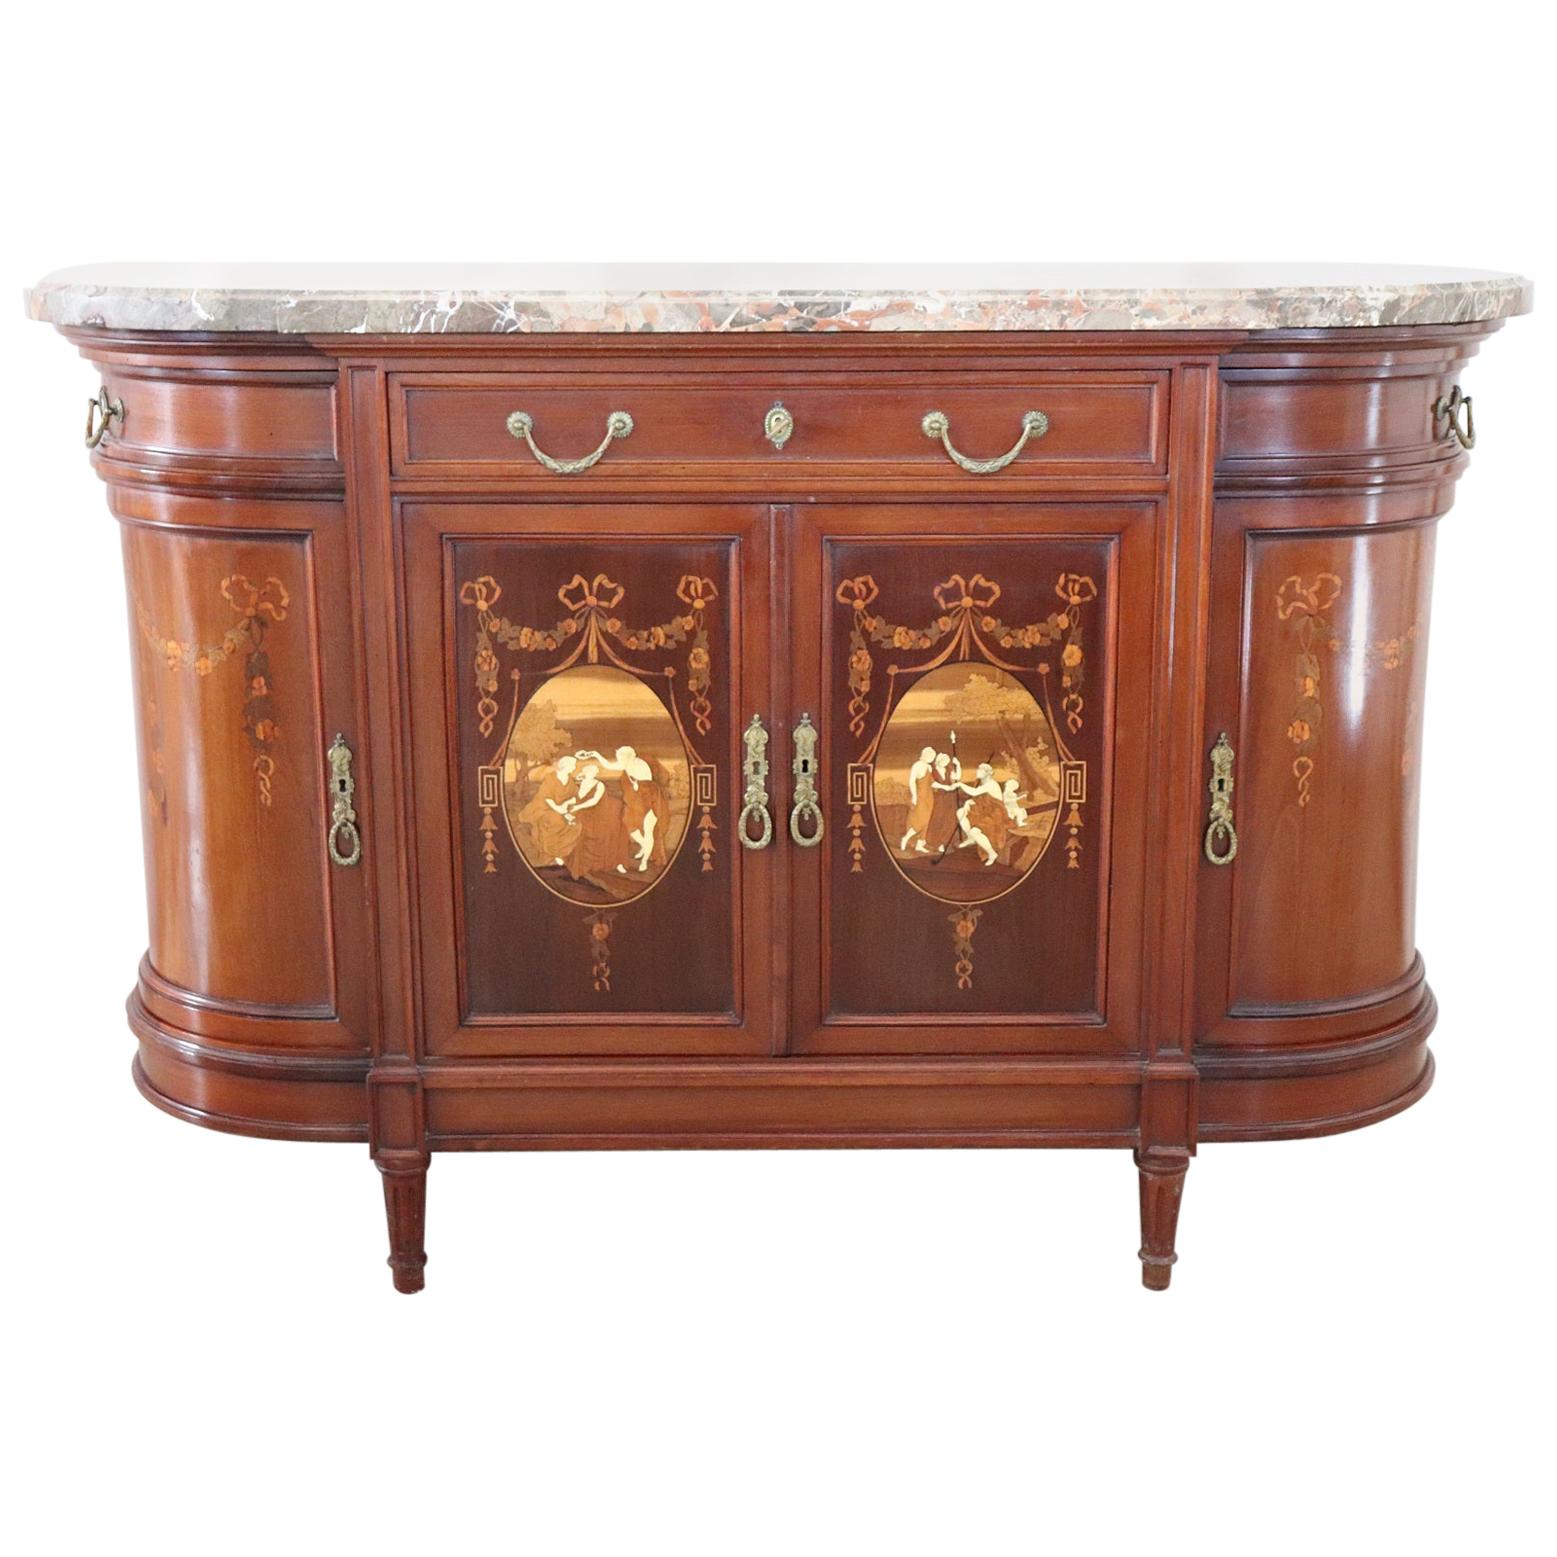 20th Century Italian Neoclassical Style Inlaid Cherrywood Sideboard or Buffet